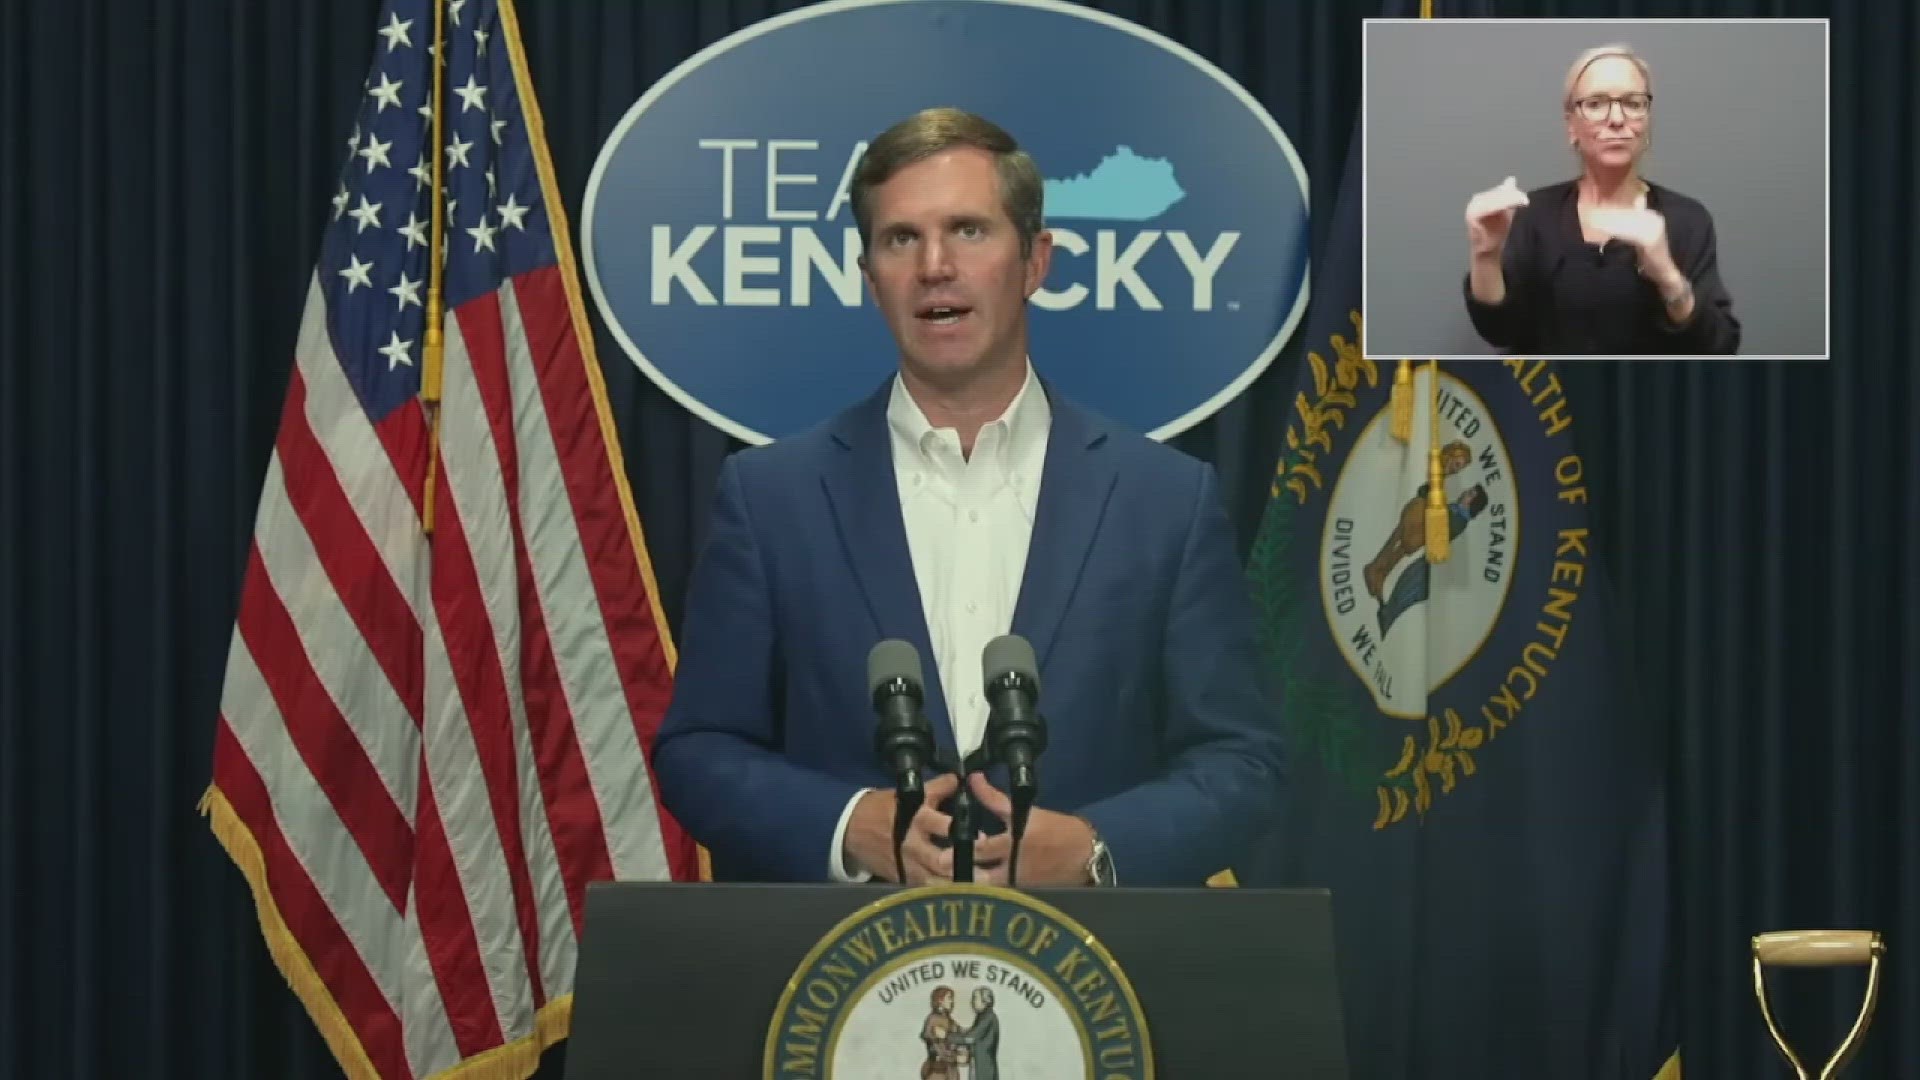 According to Beshear, the general fund receipts for the fiscal year totaled more than $15 billion, exceeding budgeted estimates by $1.4 billion.